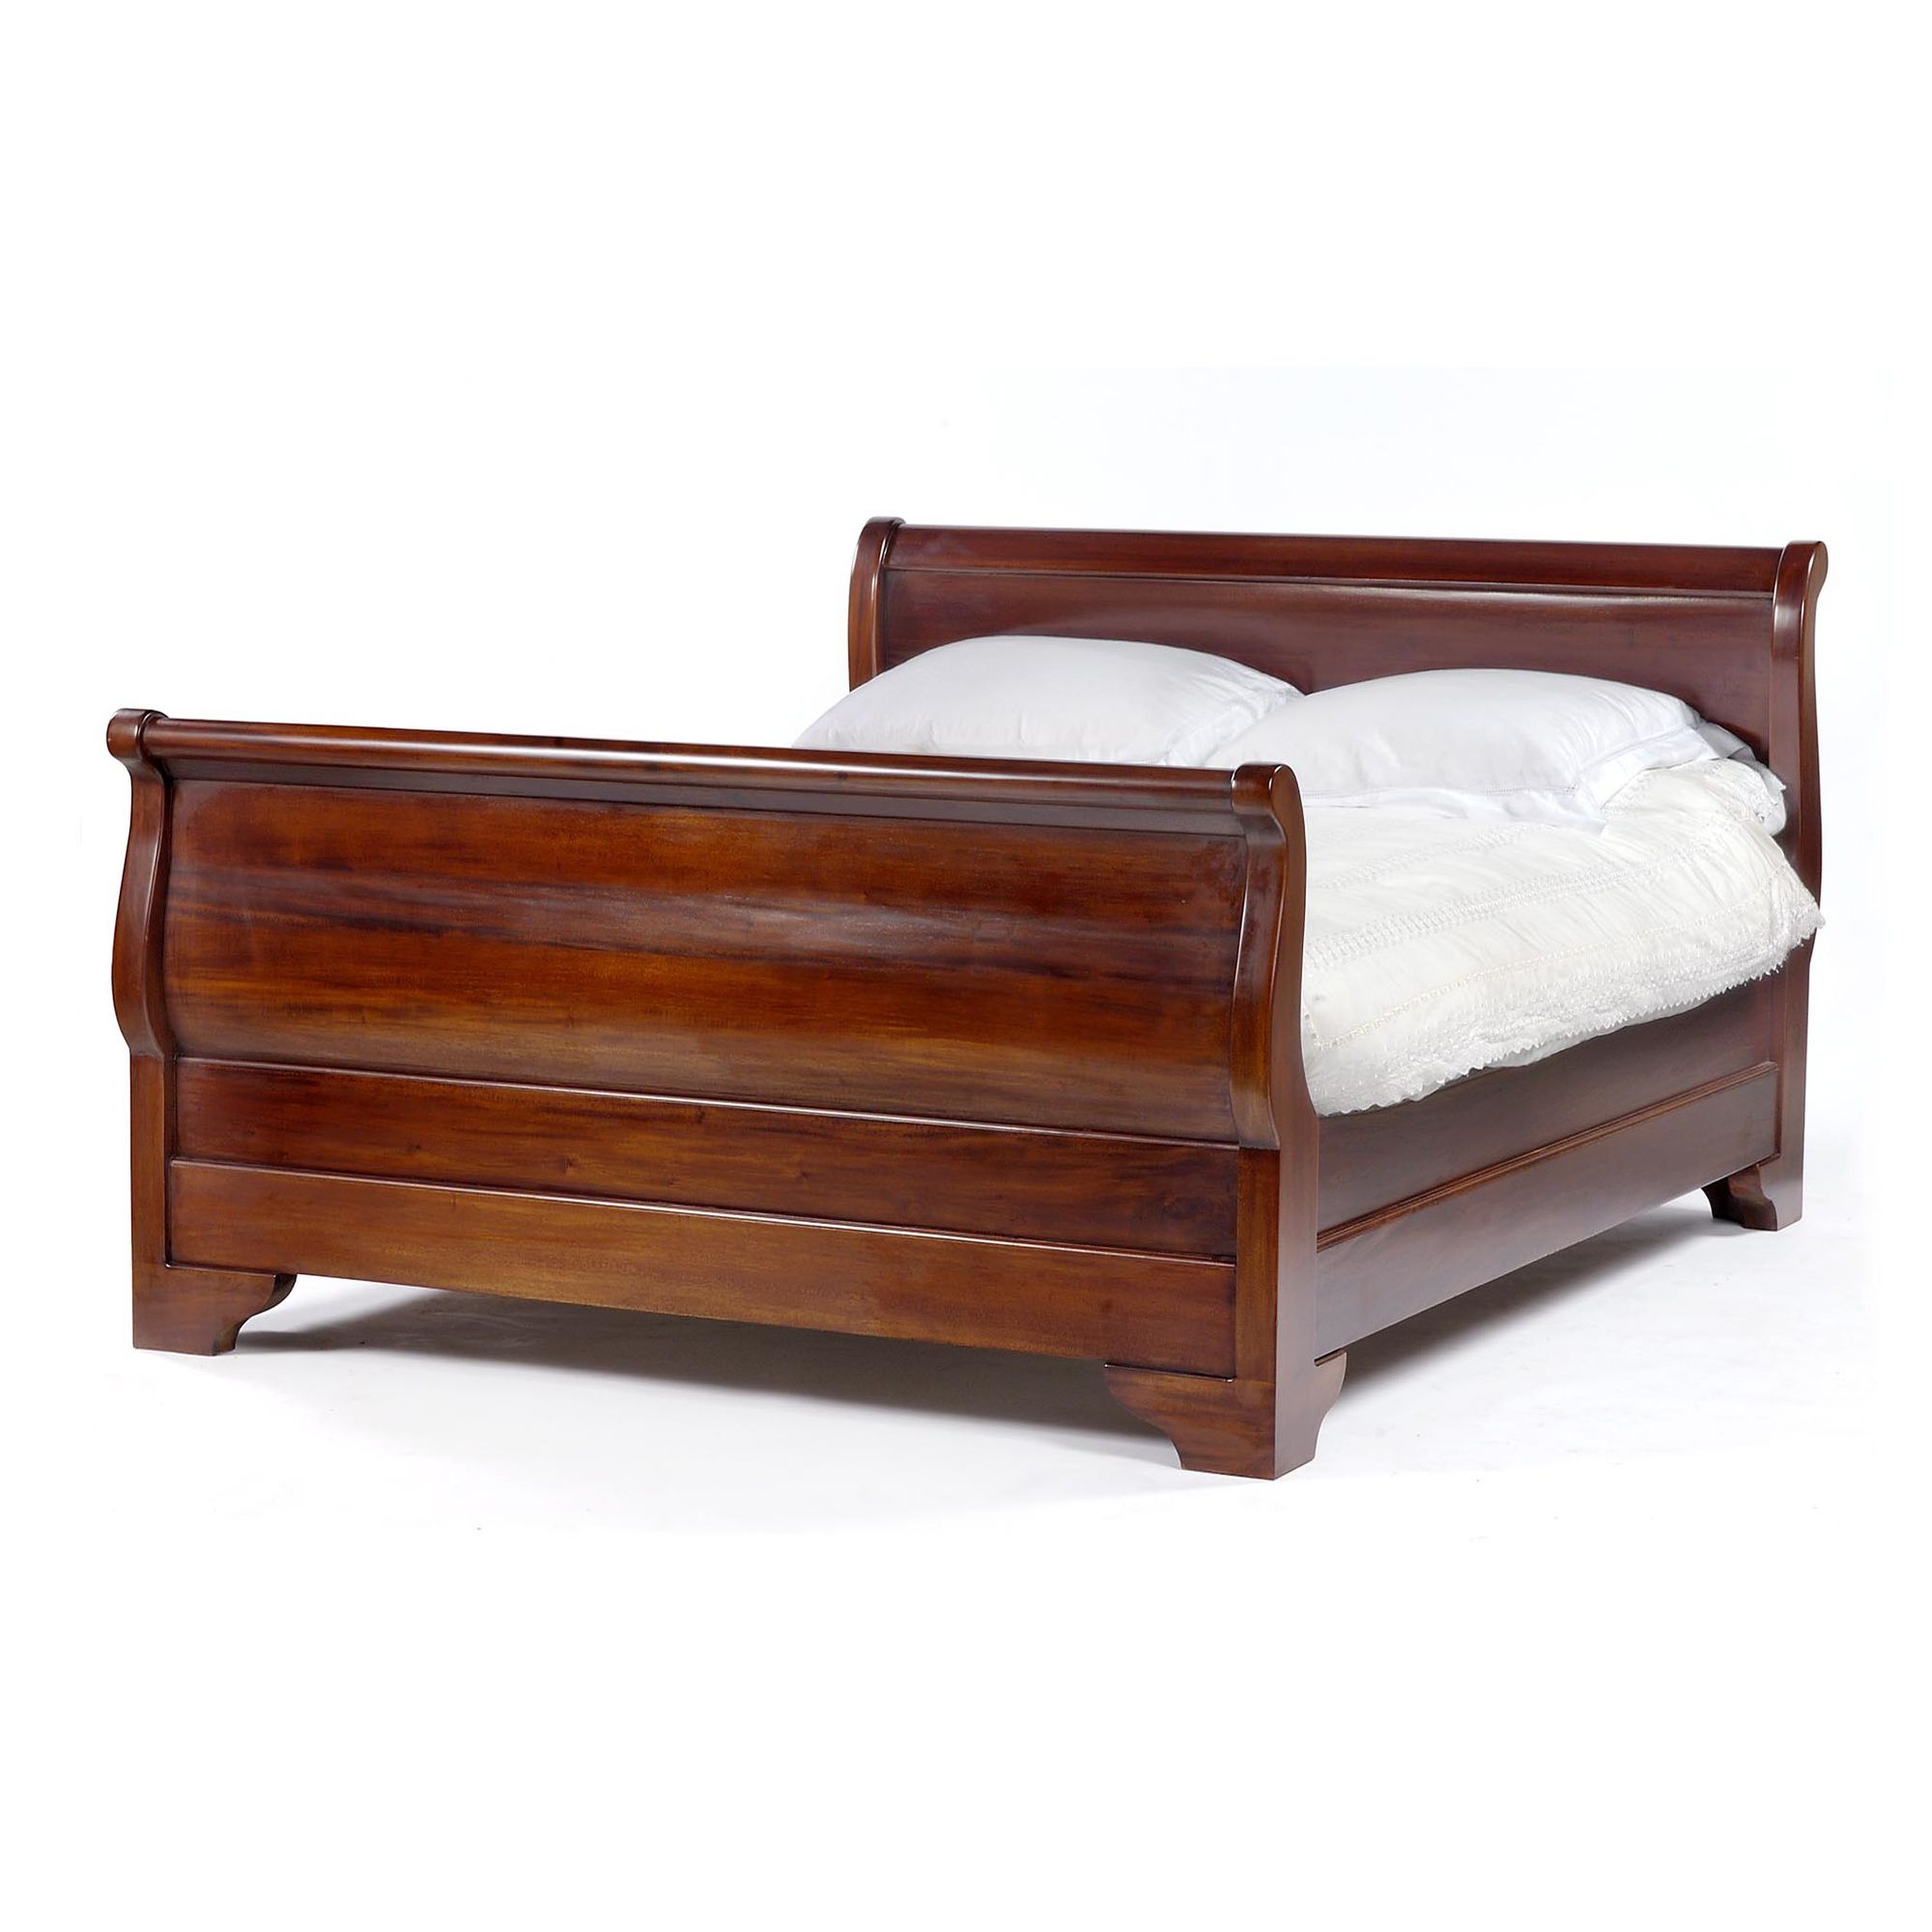 Anderson Bradshaw High-Back Sleigh Bed Frame - King at Tesco Direct